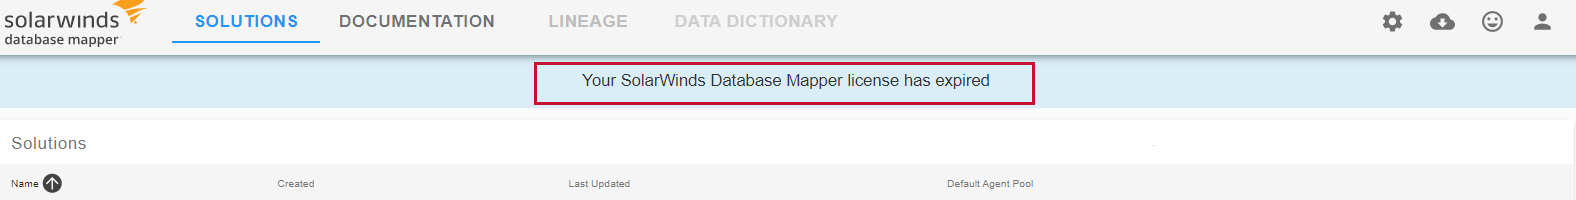 Database Mapper Your license has expired message